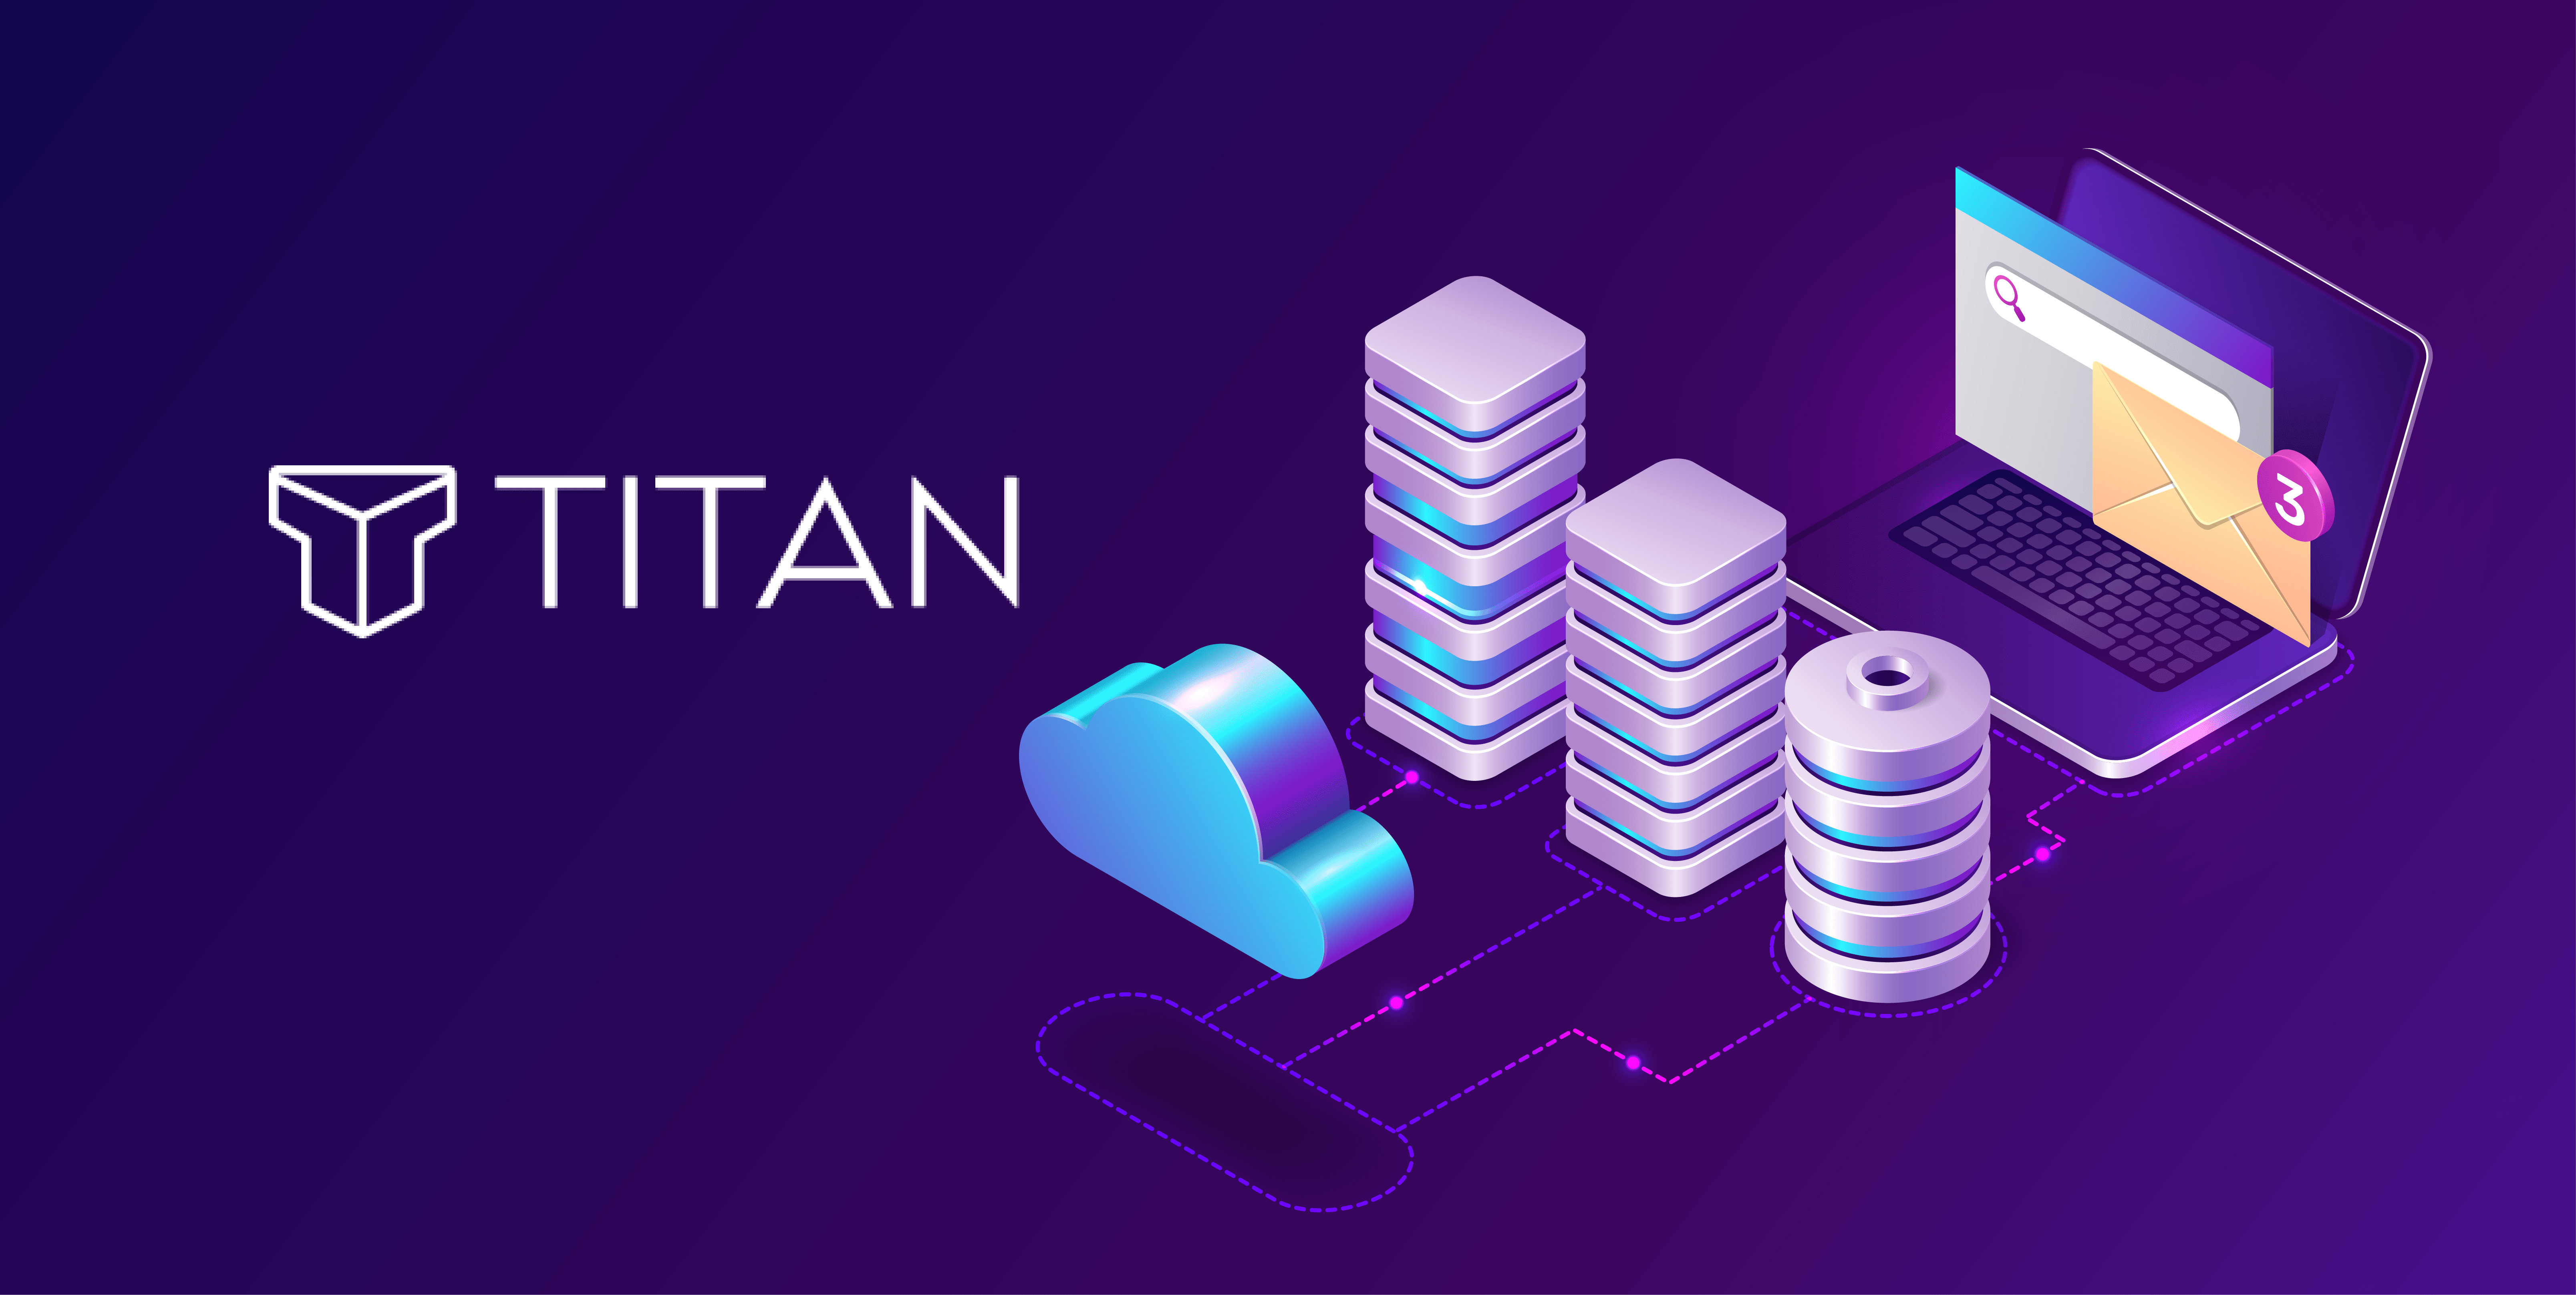 How to use Titan mails?